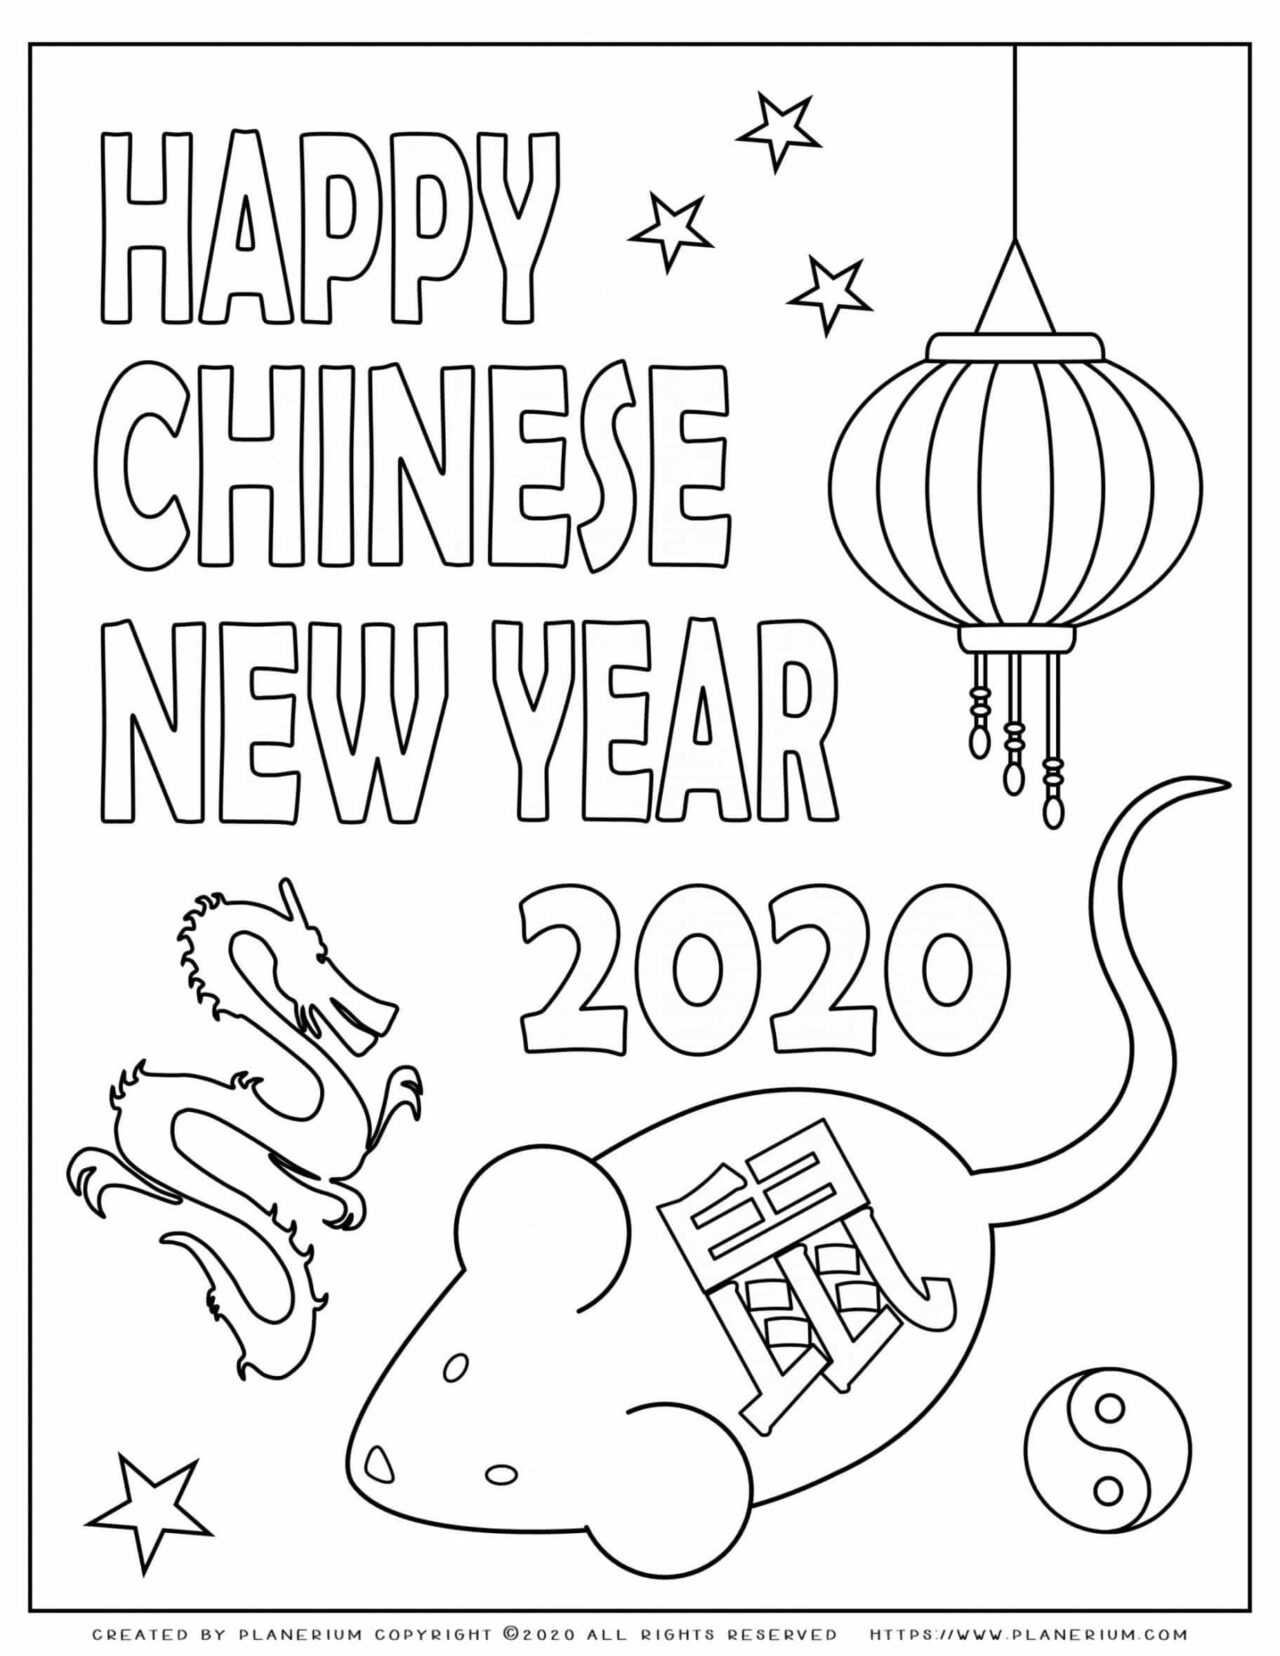 Lunar New Year Chinese Year of the Rat 2020 - Coloring Page - Symbols | Planerium